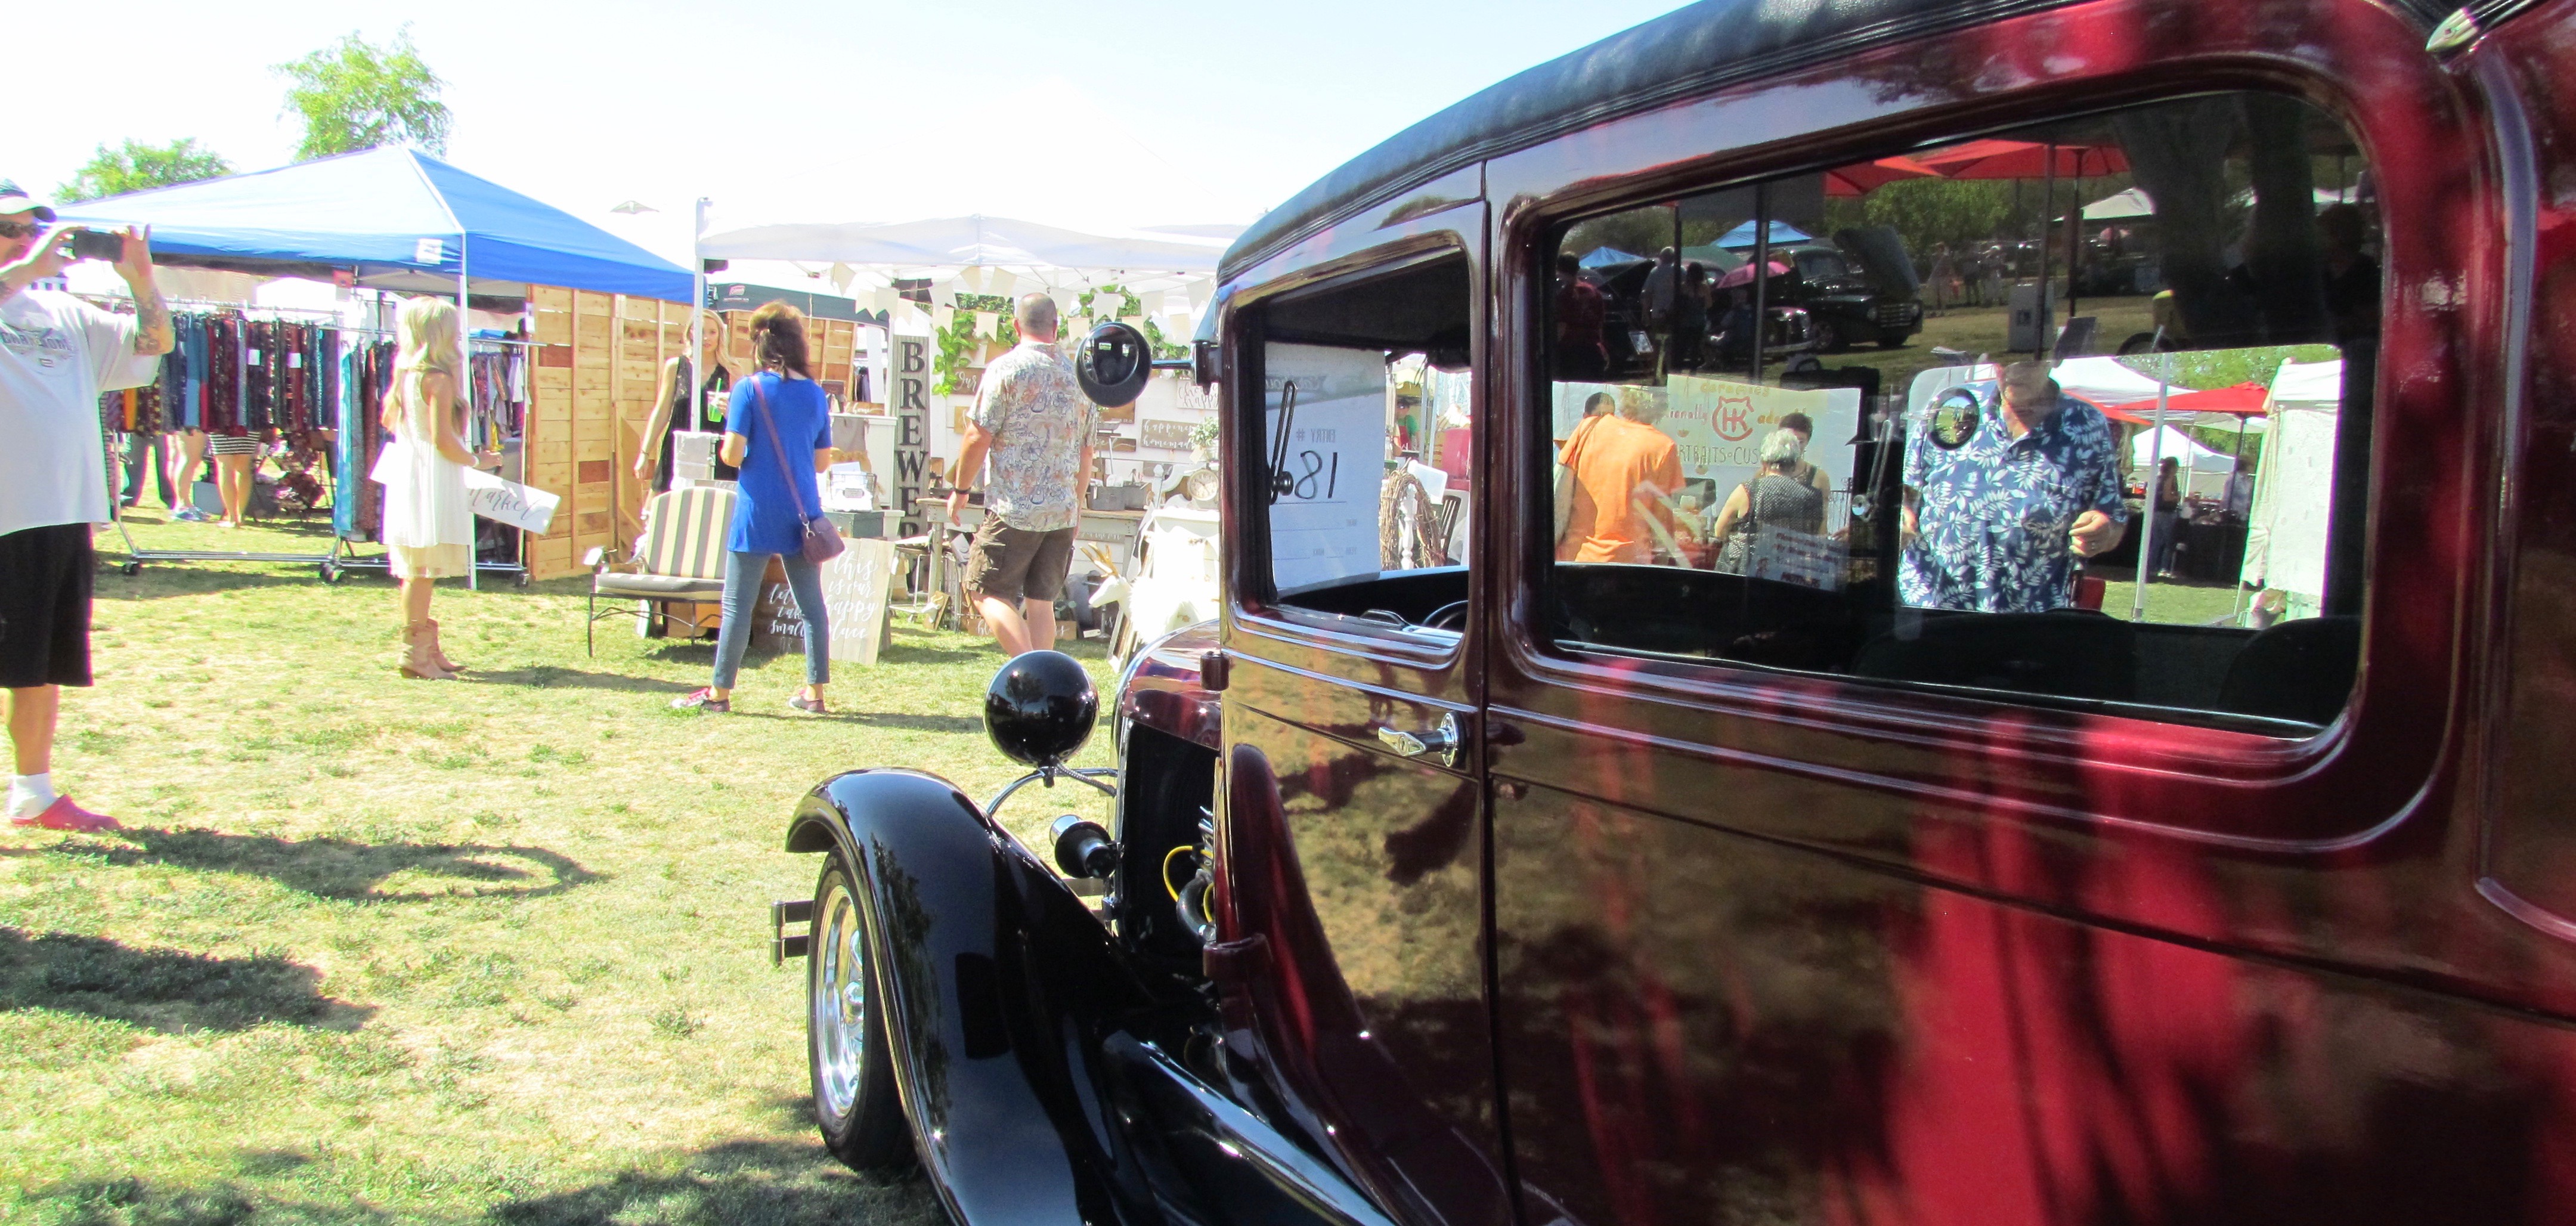 For the first time, vintage and classic cars were invited to join vendors at Front Porch Pickins market | Larry Edsall photos